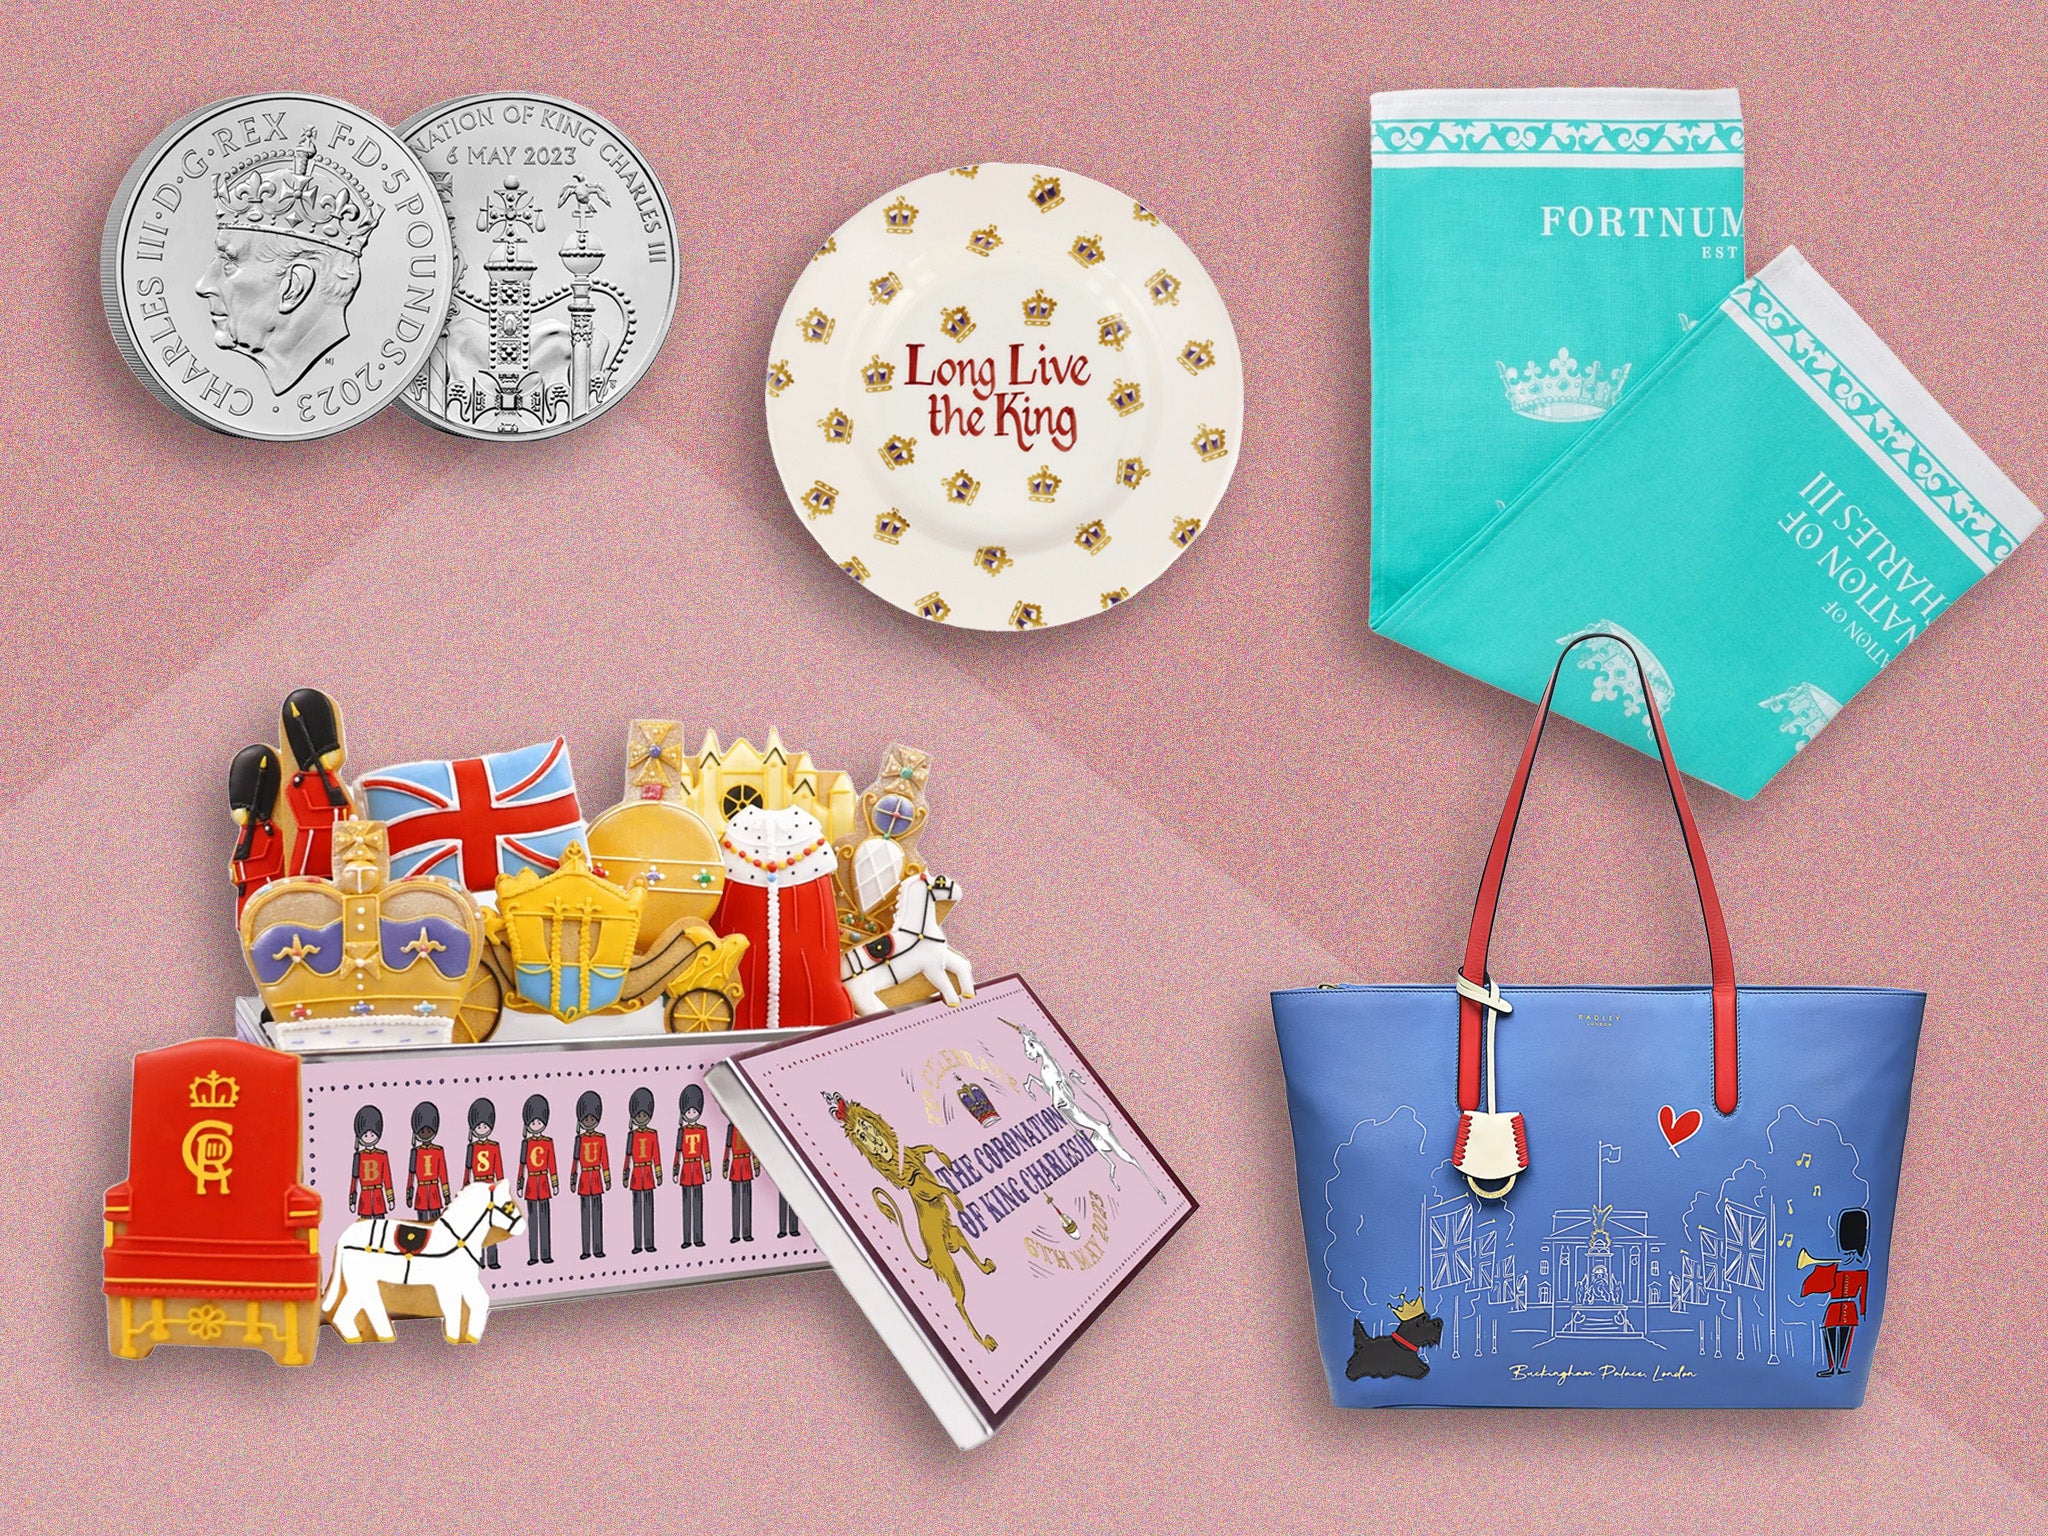 Mark the royal occasion in style with celebratory products from M&S, Aldi, Fortnum & Mason and more